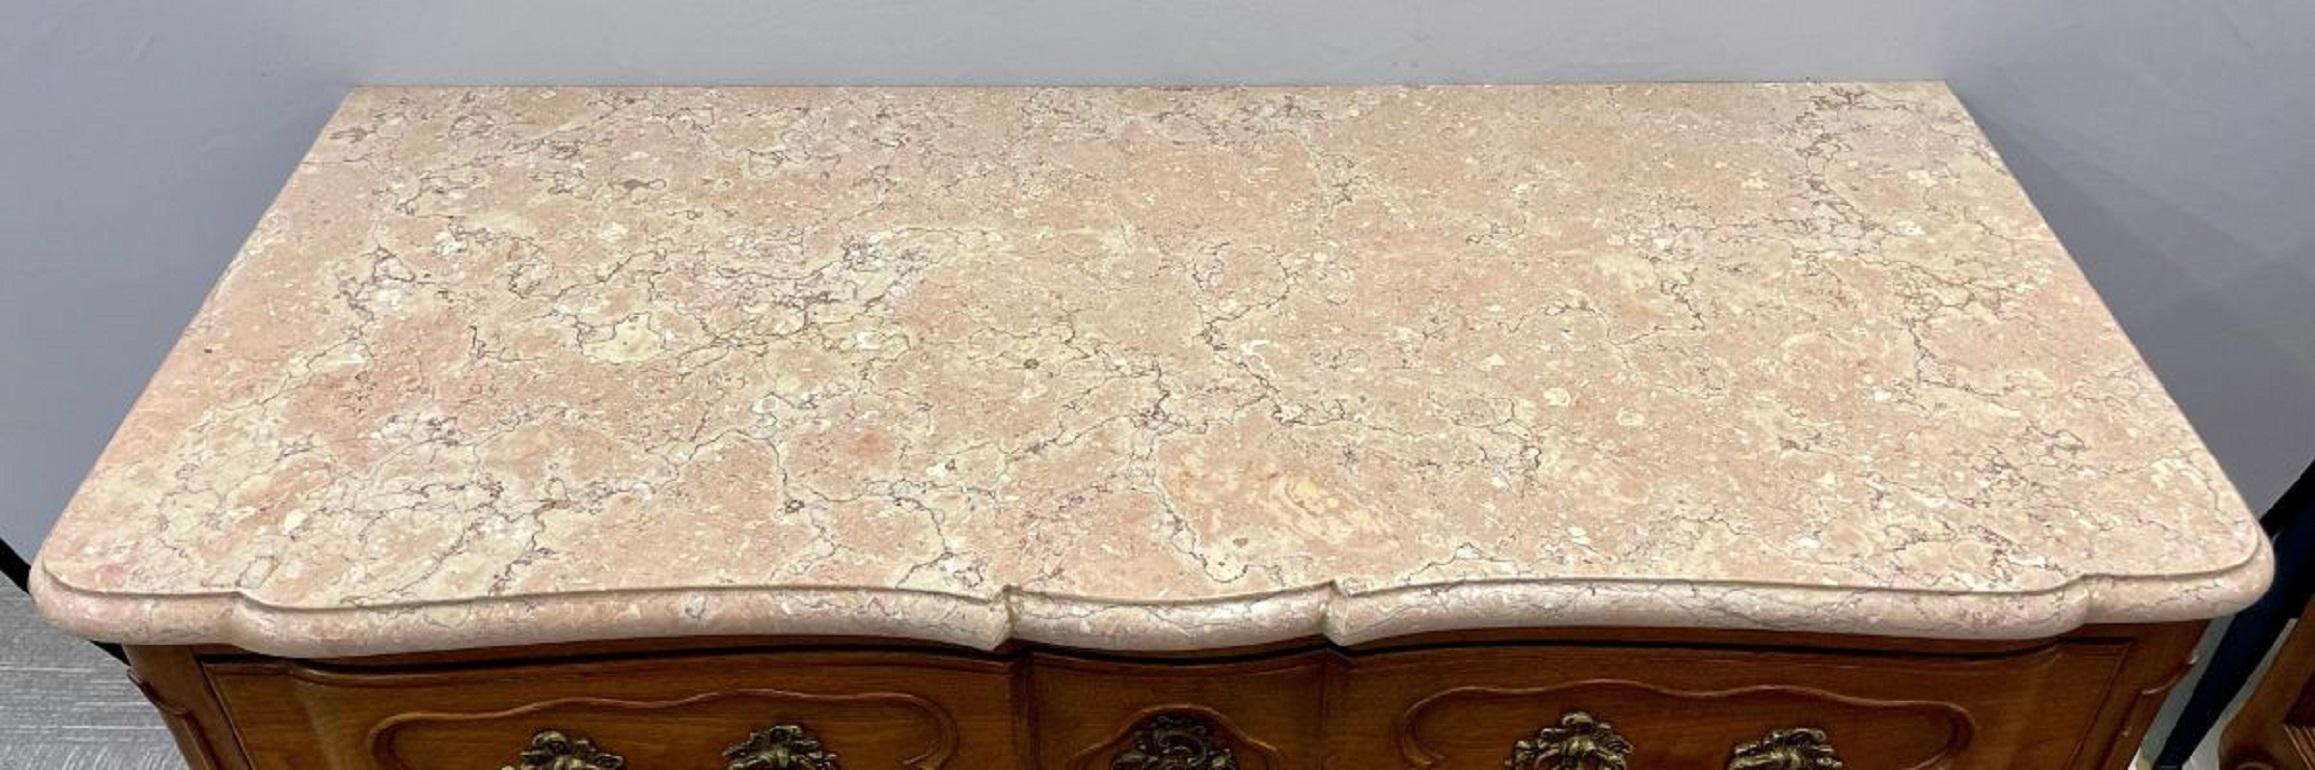 Pair of Marble-Top Louis XV Style Commodes Chests Attributed to Maison Jansen For Sale 2